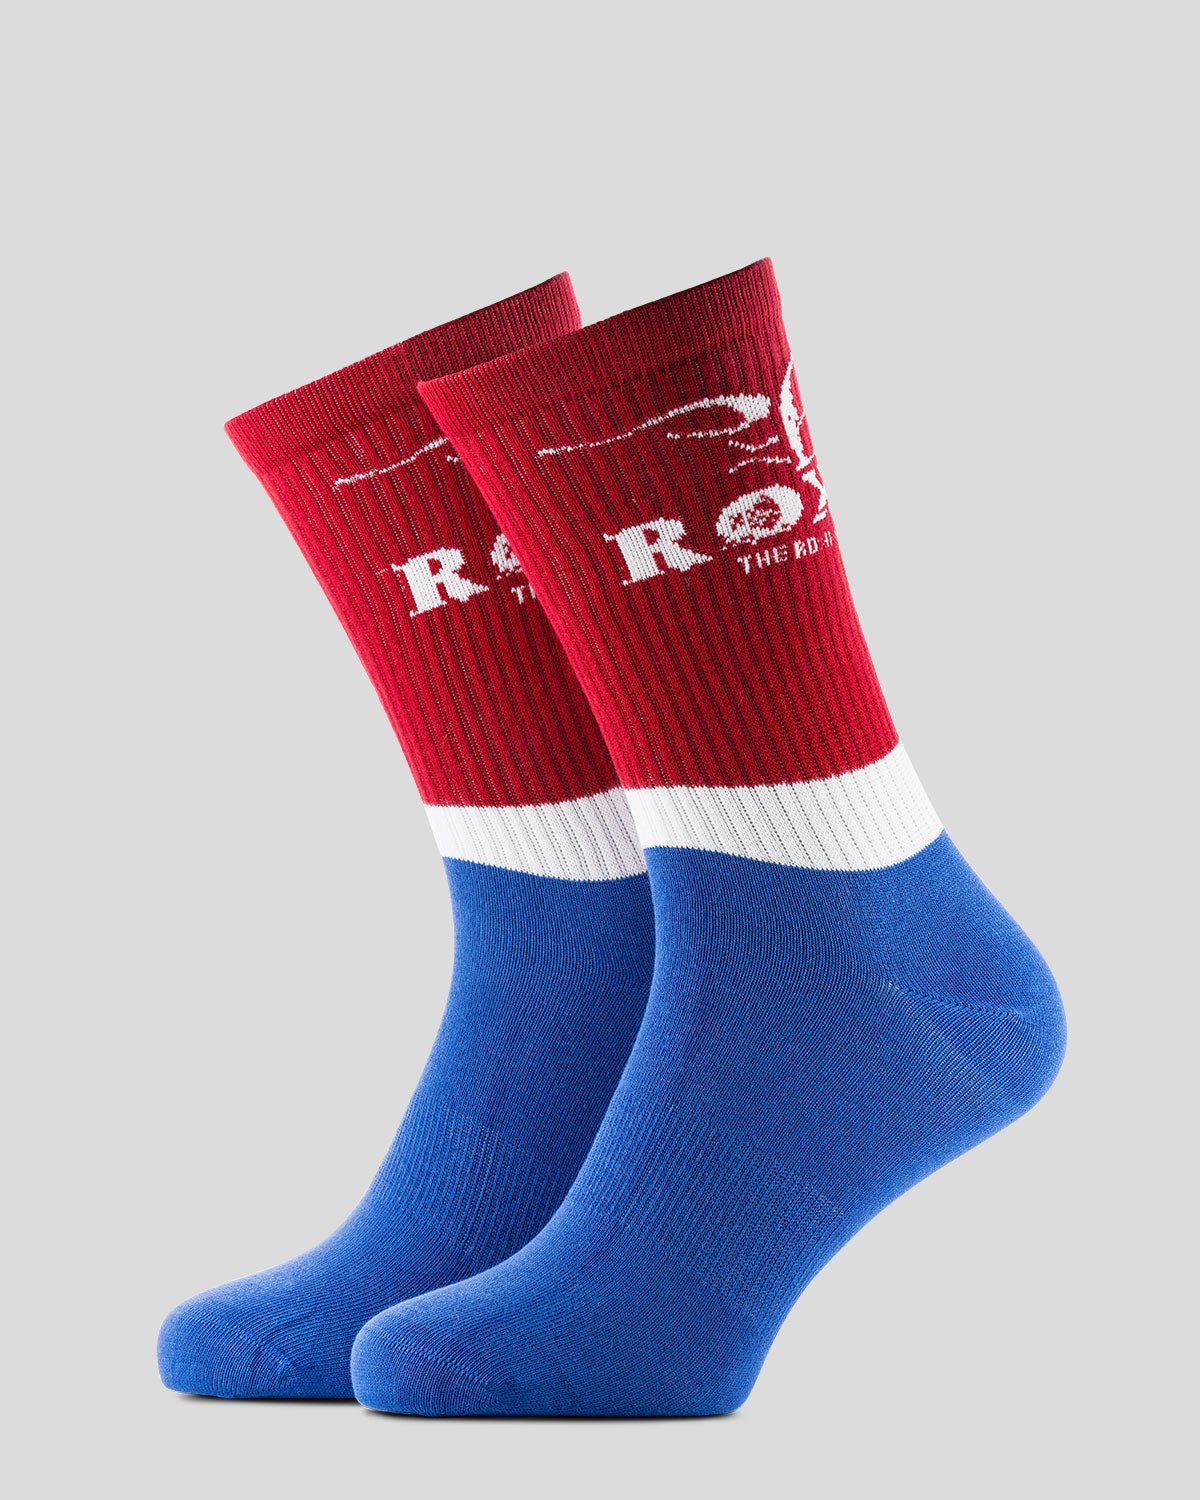 Classic 2 LT Red/Blue/White